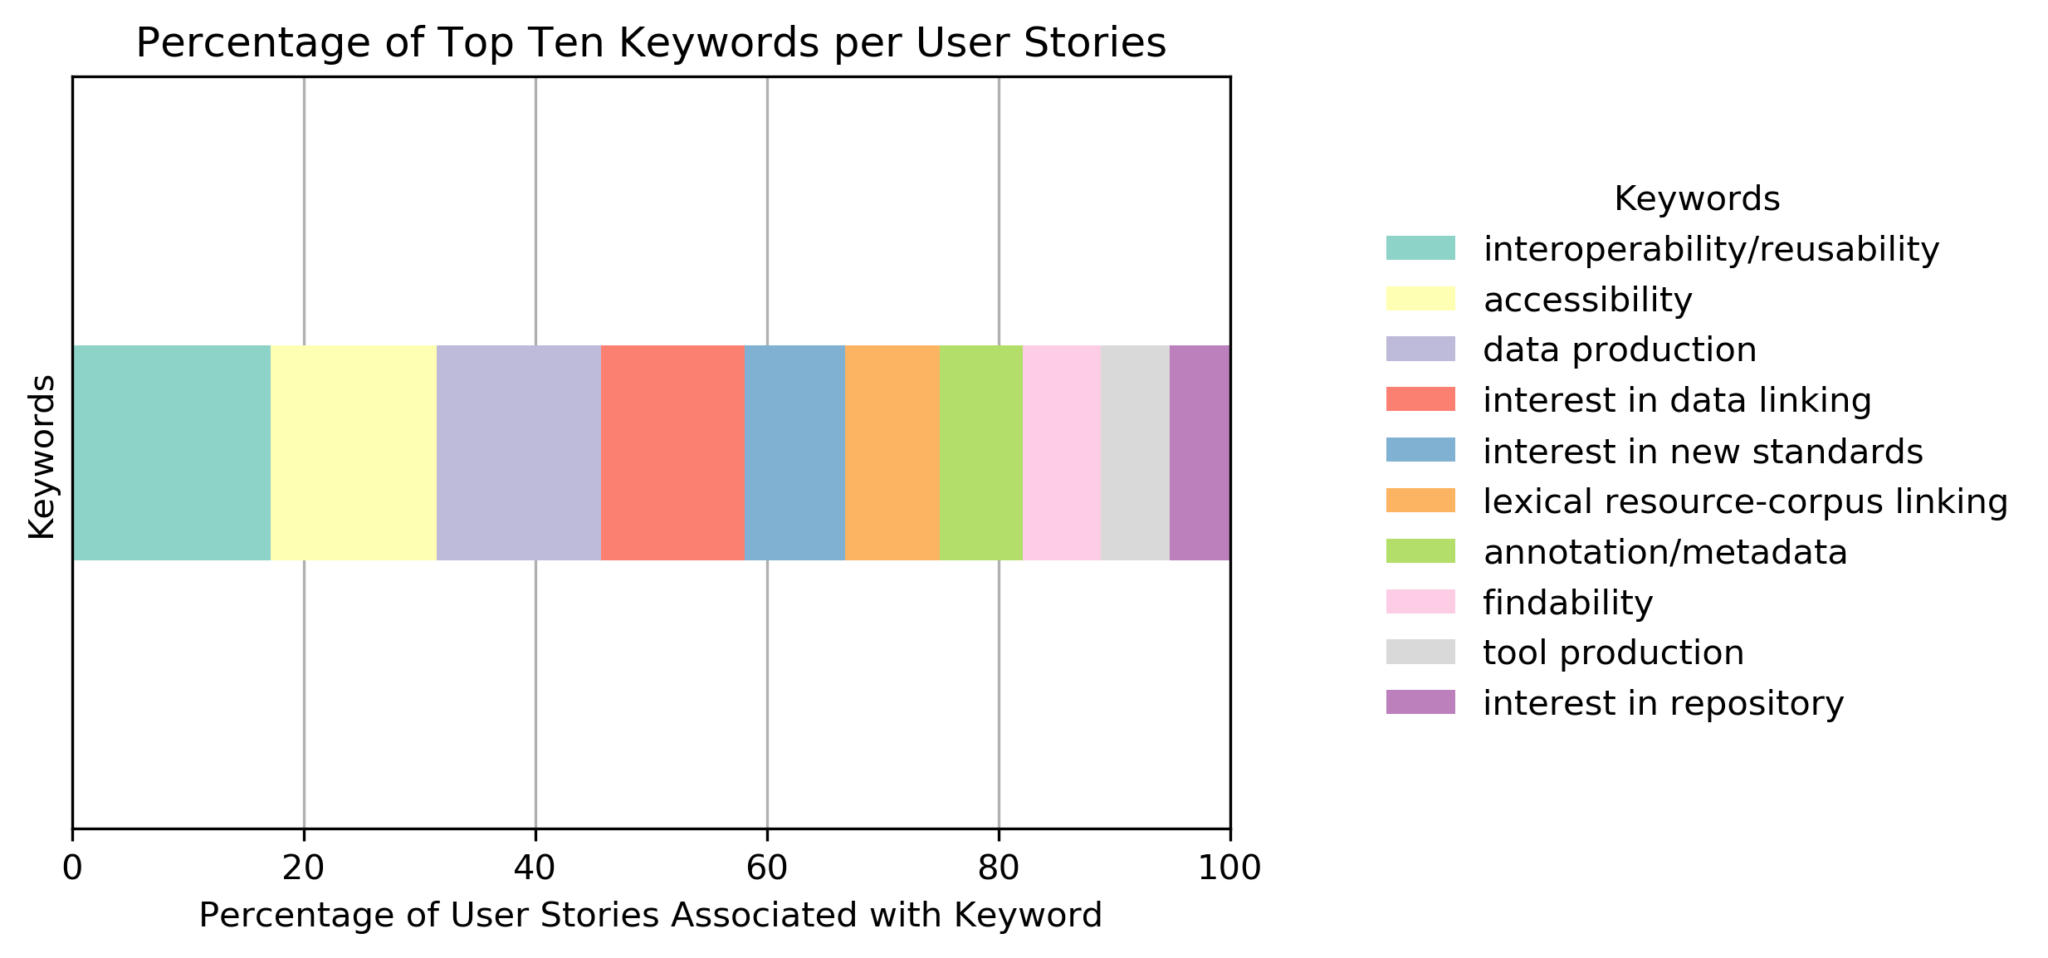 Percentage of User Stories for the 10 most-used keywords